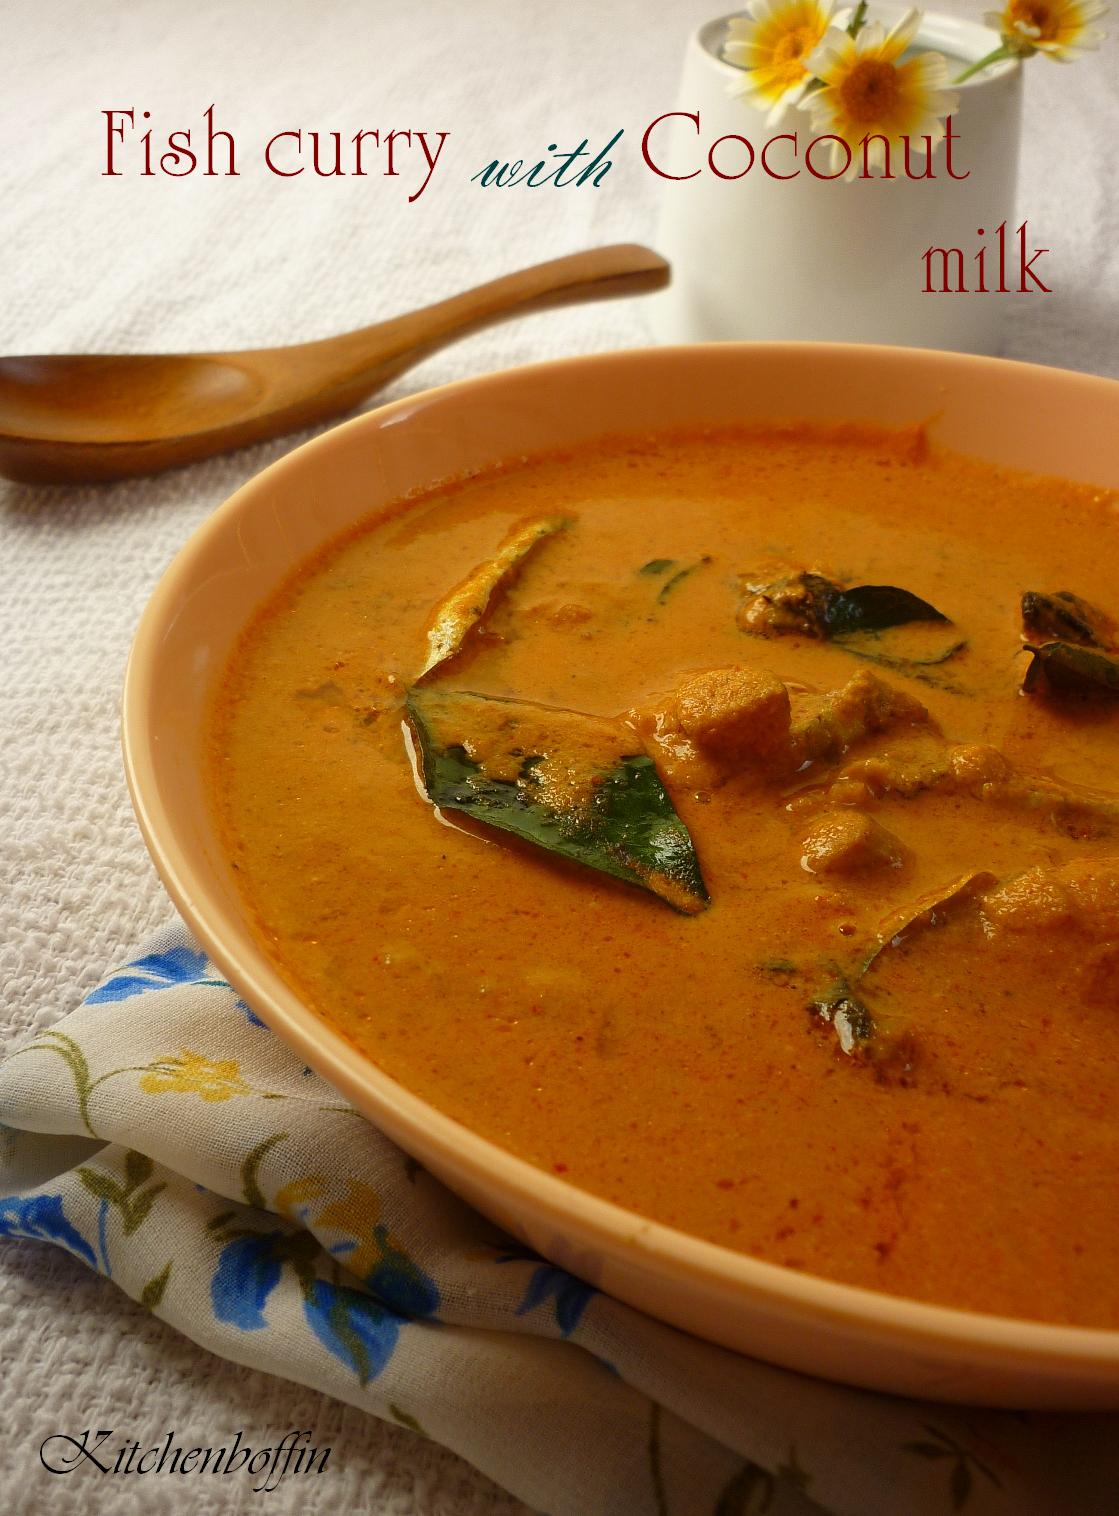 Kitchen Boffin: Fish curry with Coconut milk